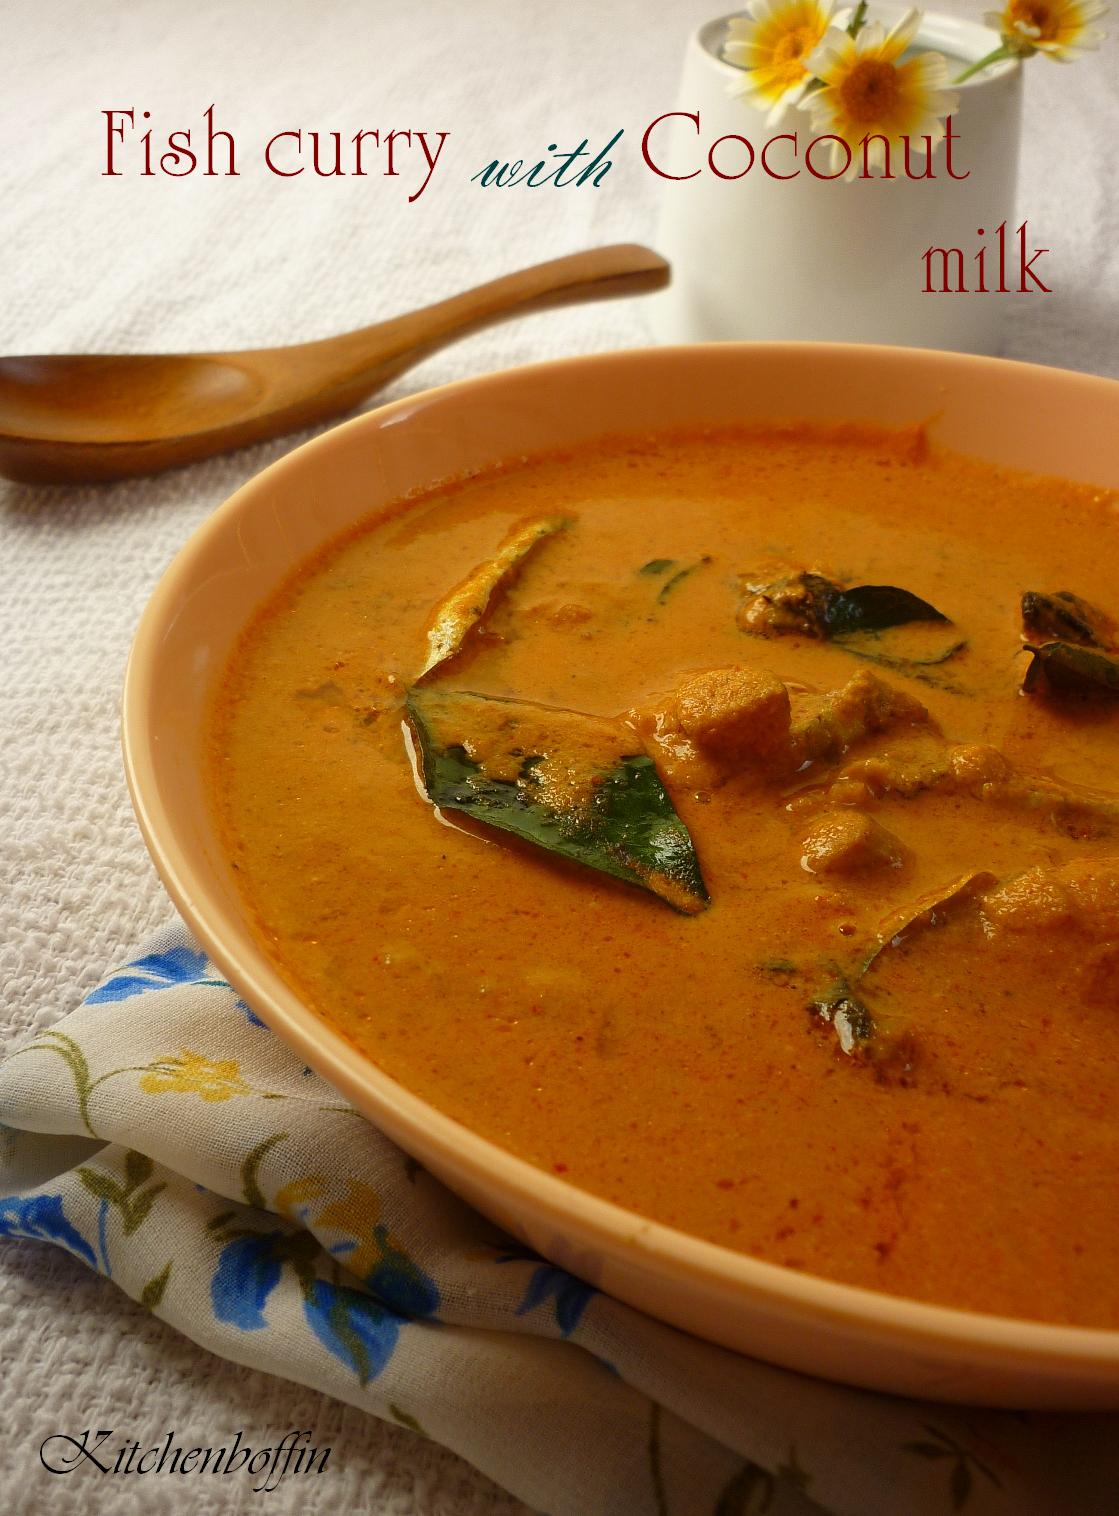 Kitchen Boffin: Fish curry with Coconut milk